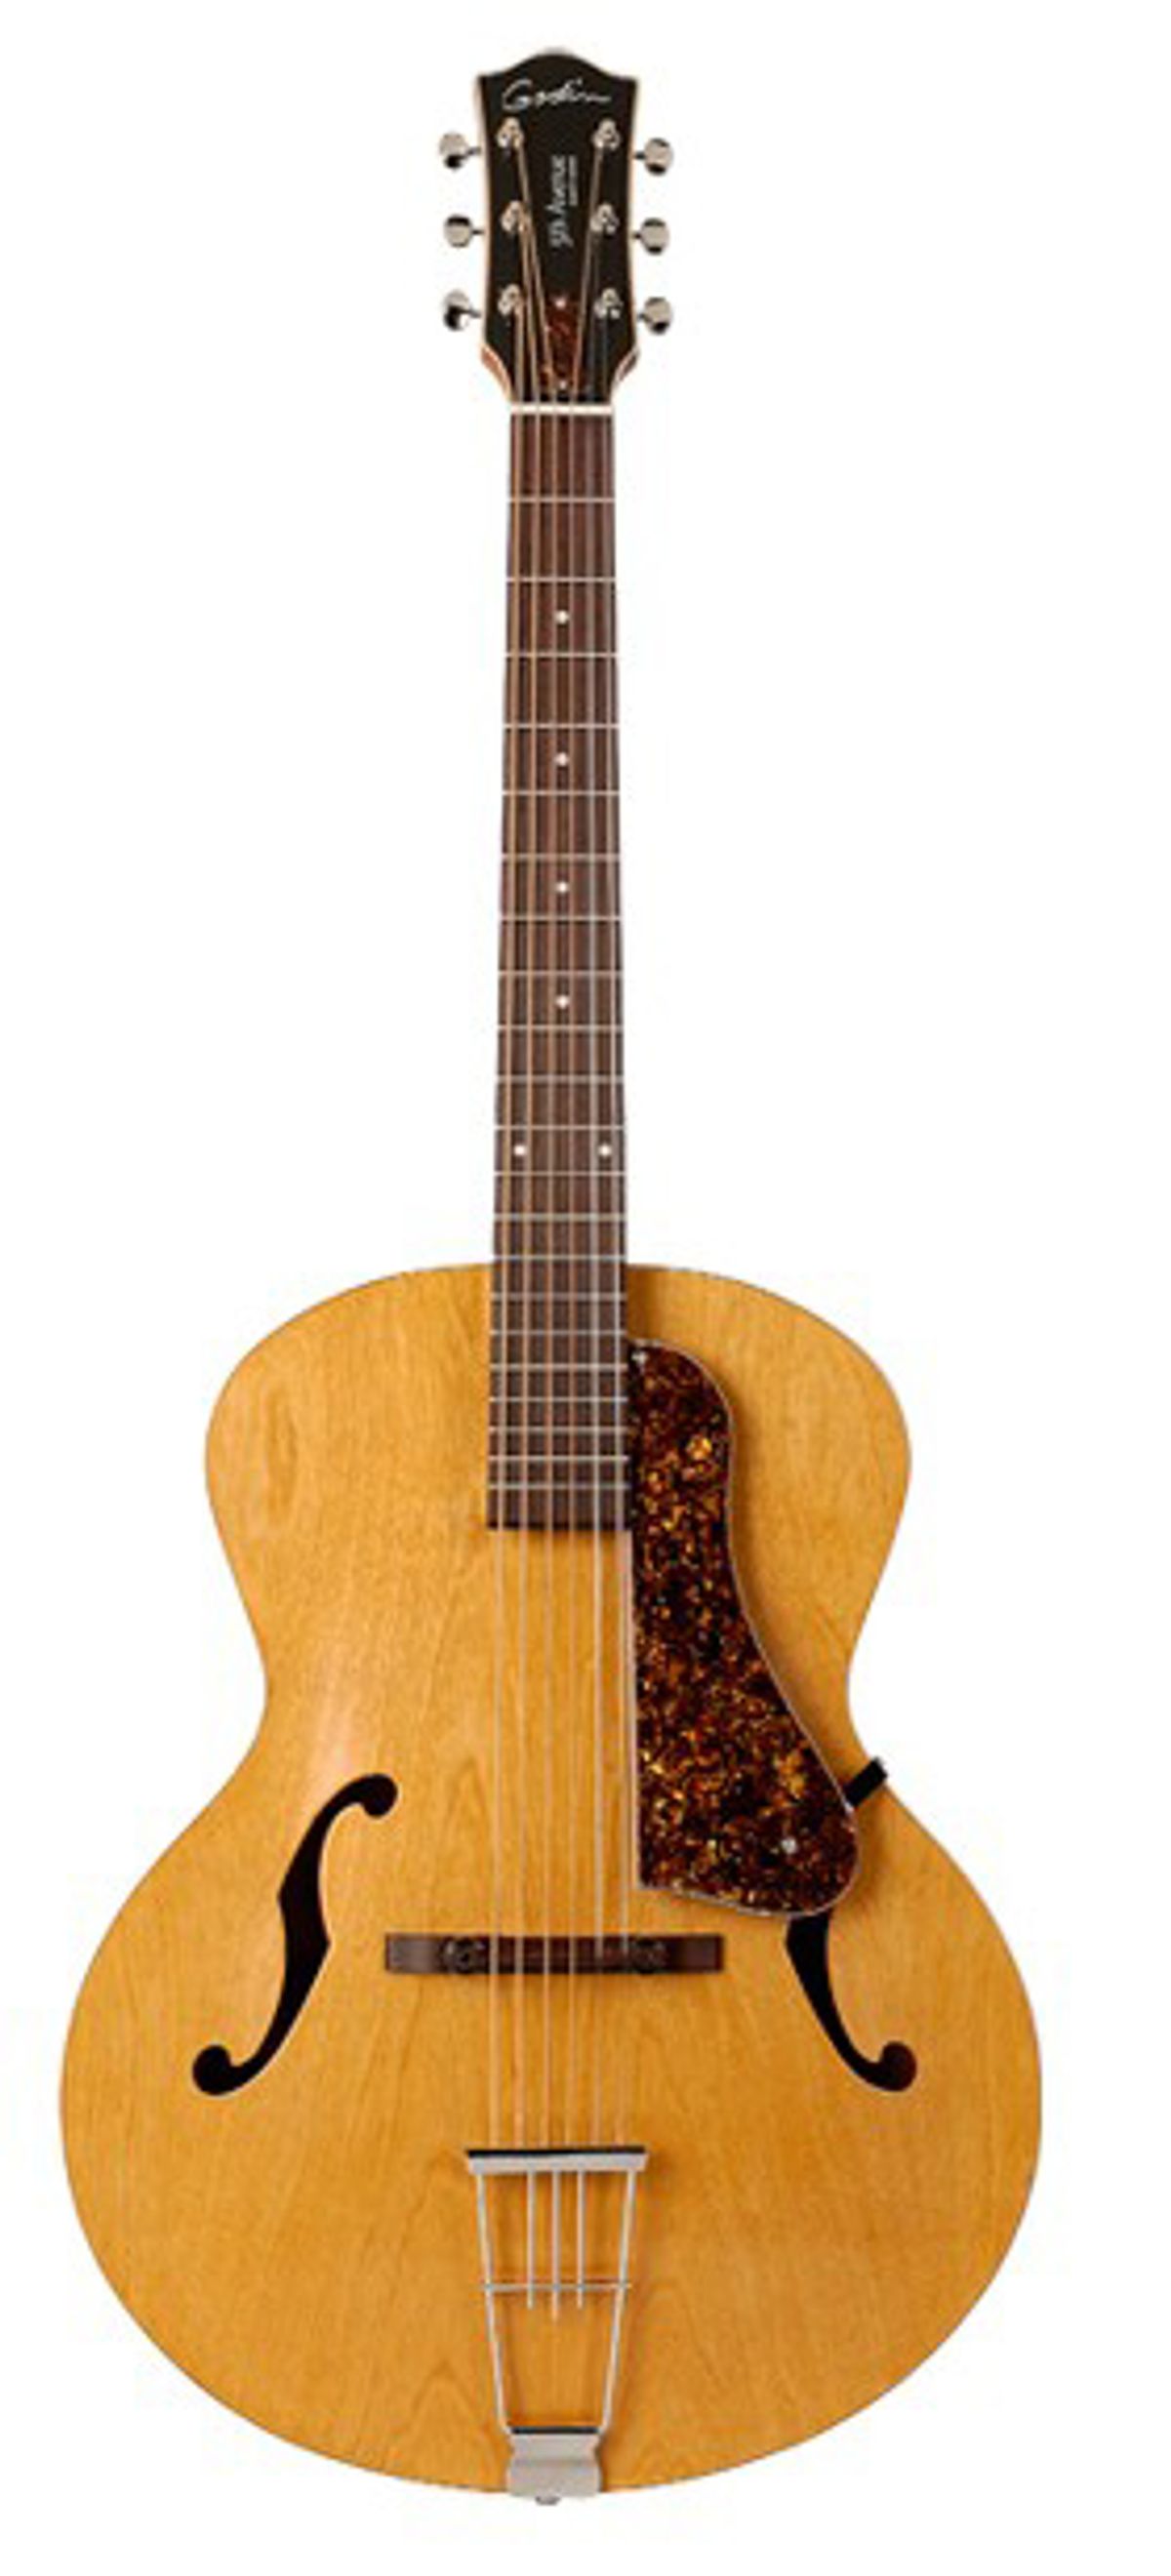 Review: Godin 5th Avenue Archtop